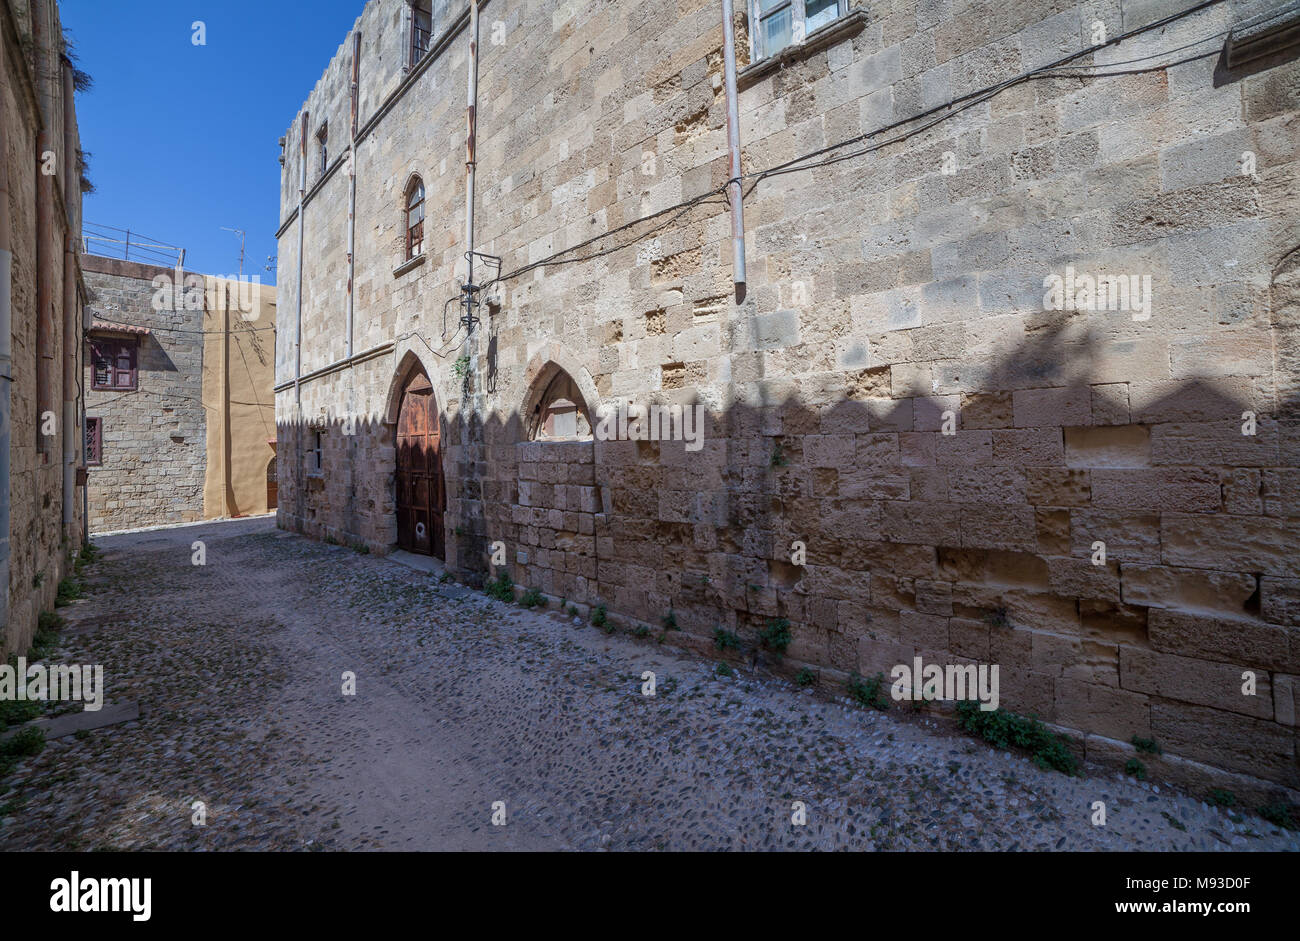 Crenellated, saw-like shadow on the wall of a building in the old town of Rhodes Stock Photo